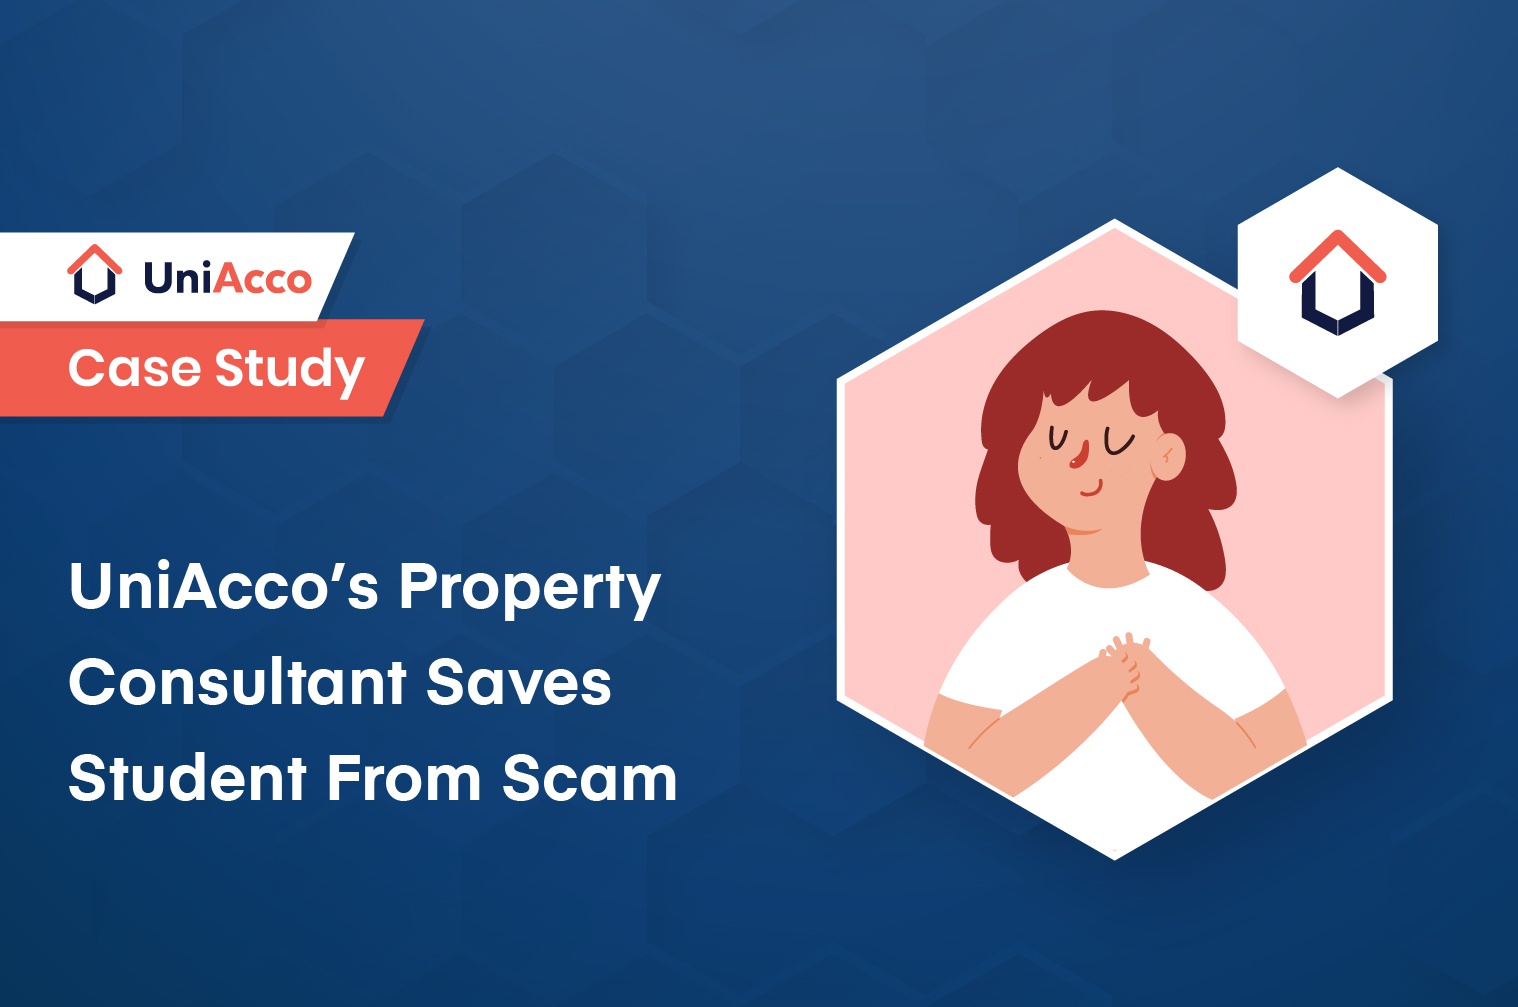 Case Study - UniAcco’s Property Consultant Saves Student From Scam